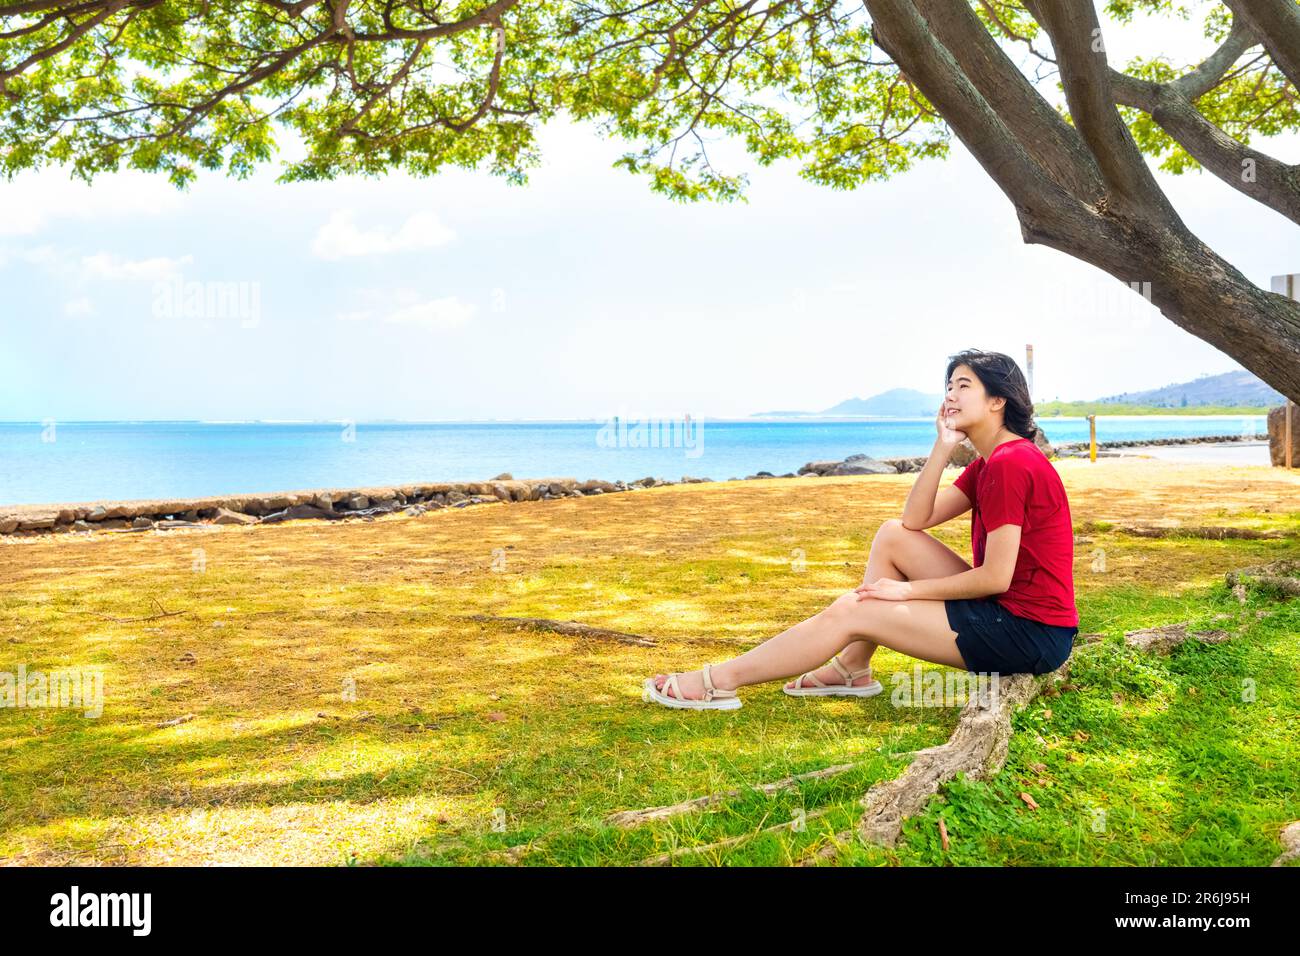 Young woman resting in shade of large canopy tree in Hawaii, with ocean horizon in background Stock Photo